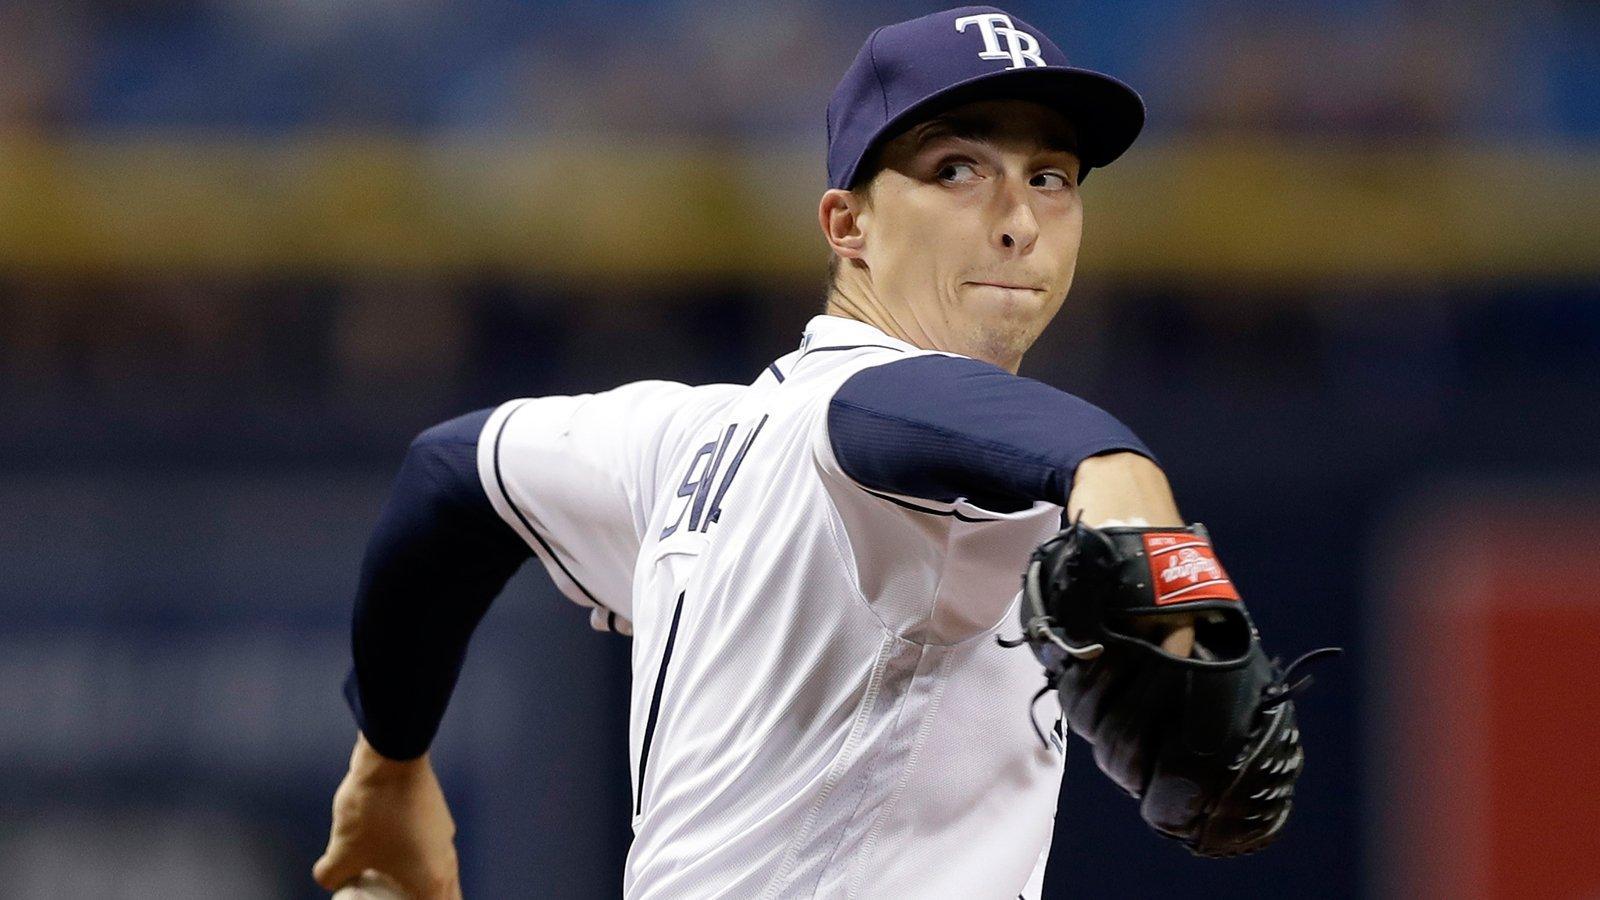 LBWMF: Blake Snell, Rays Fall To The Blue Jays, 5 2; Rasmus Rehab Update